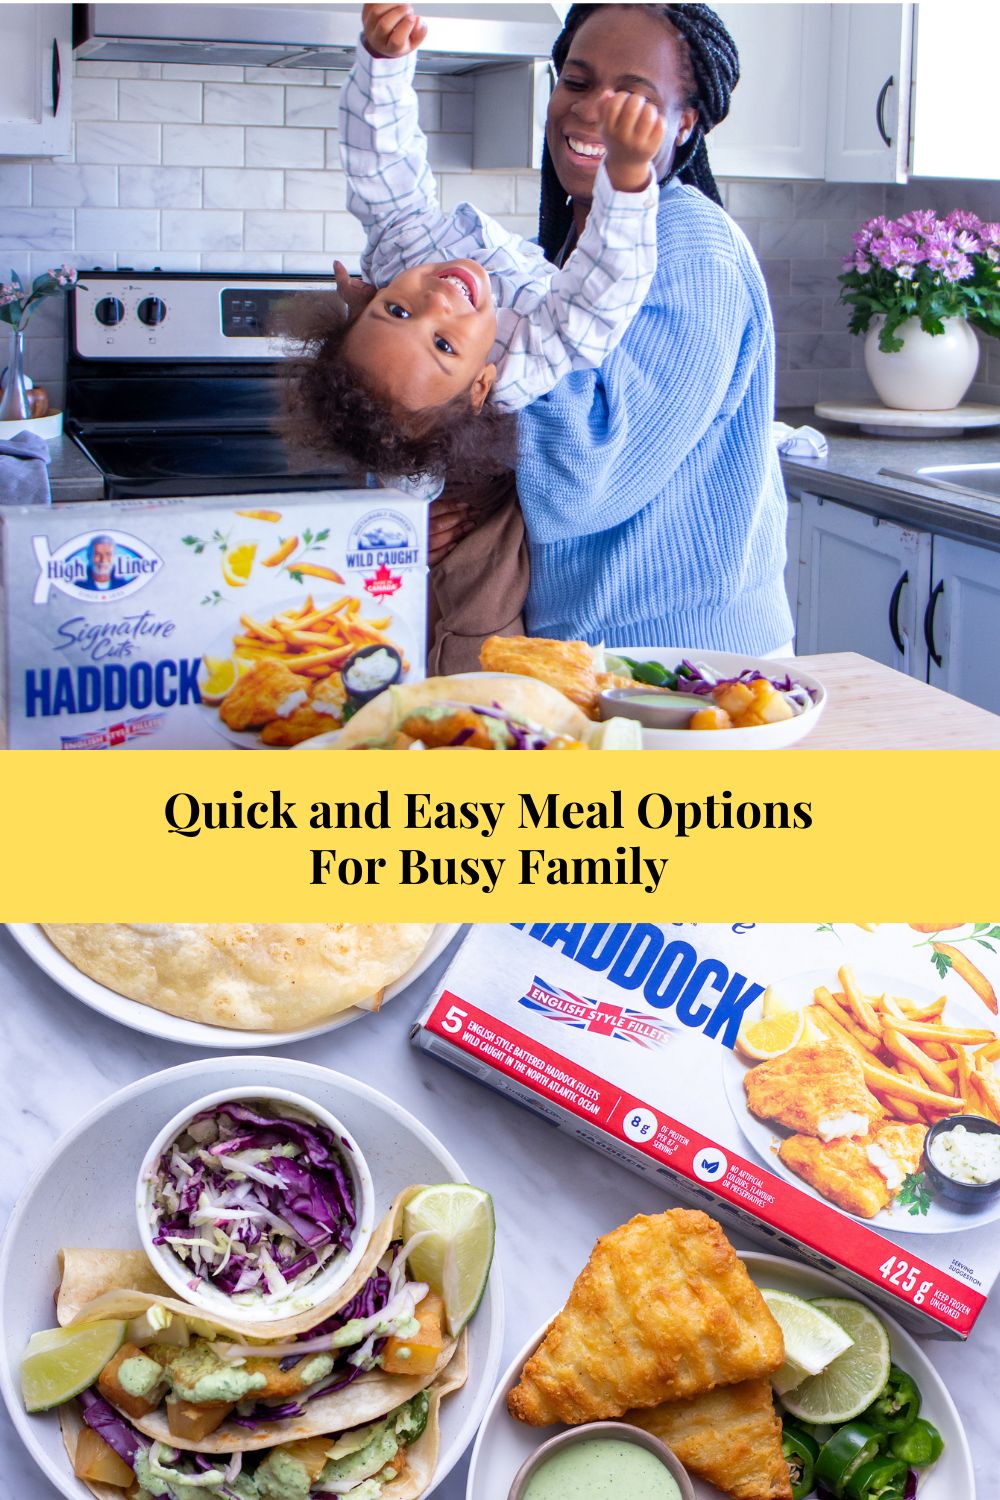 Quick and Easy Meal Options For Busy Family